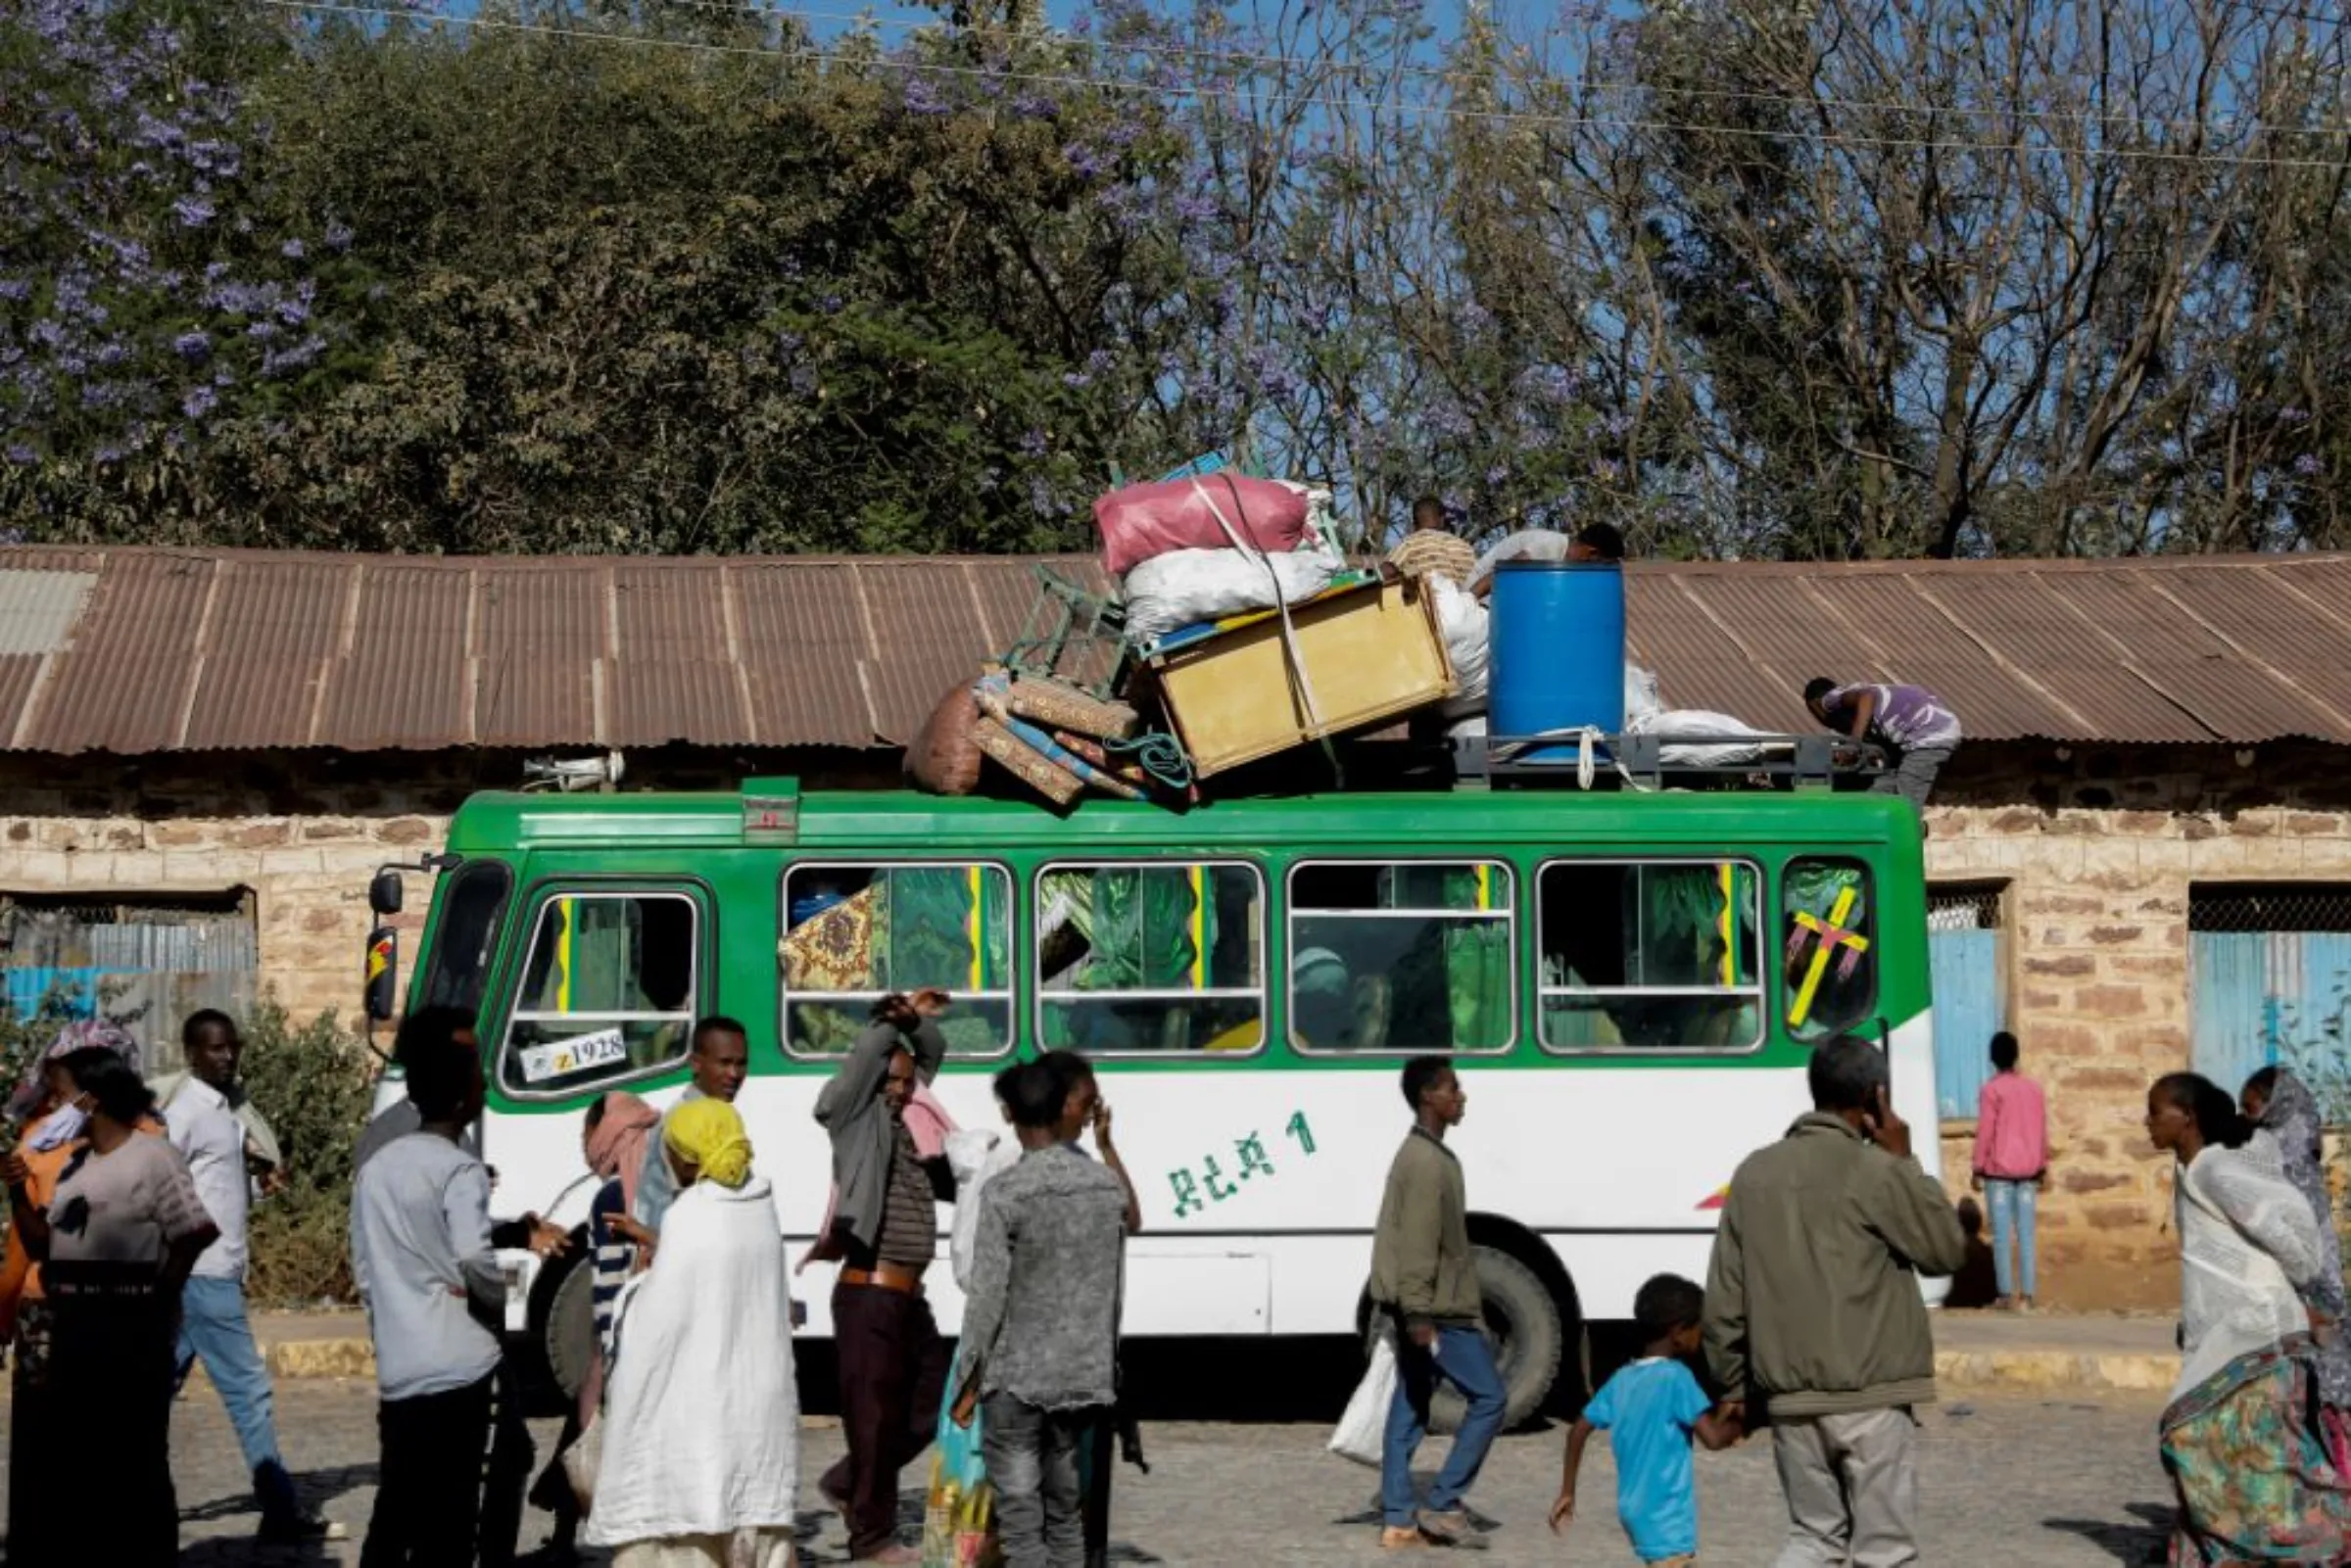 A bus carrying displaced people arrives at the Tsehaye primary school, which was turned into a temporary shelter for people displaced by conflict, in the town of Shire, Tigray region, Ethiopia, March 14, 2021